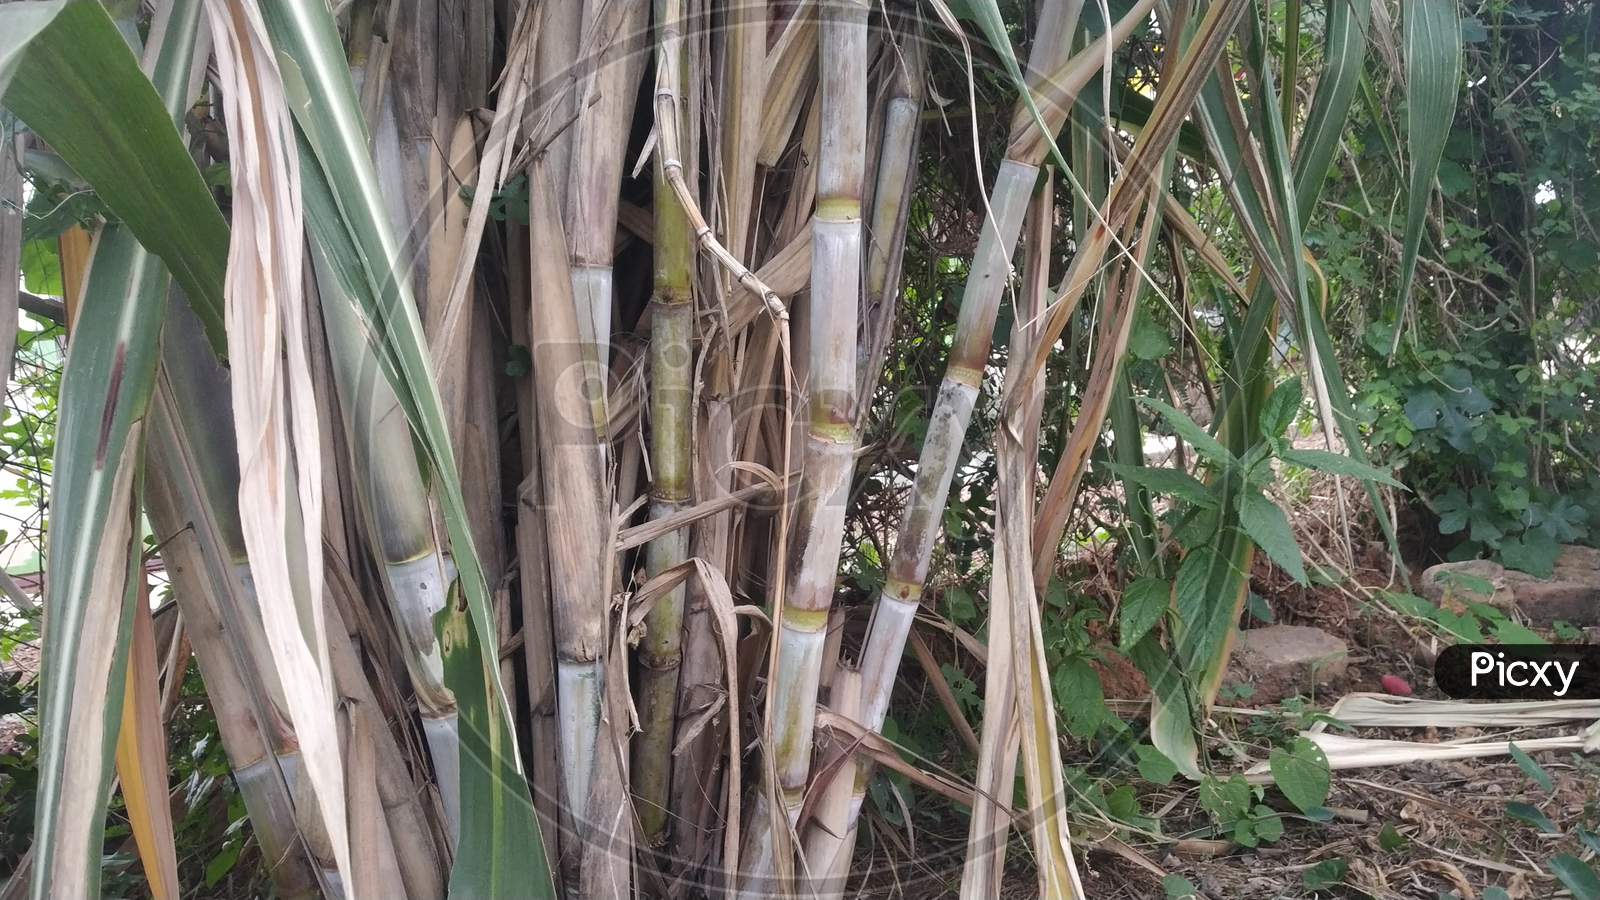 Indian Sugarcane Plants In Farm With Brown And Green Bamboo